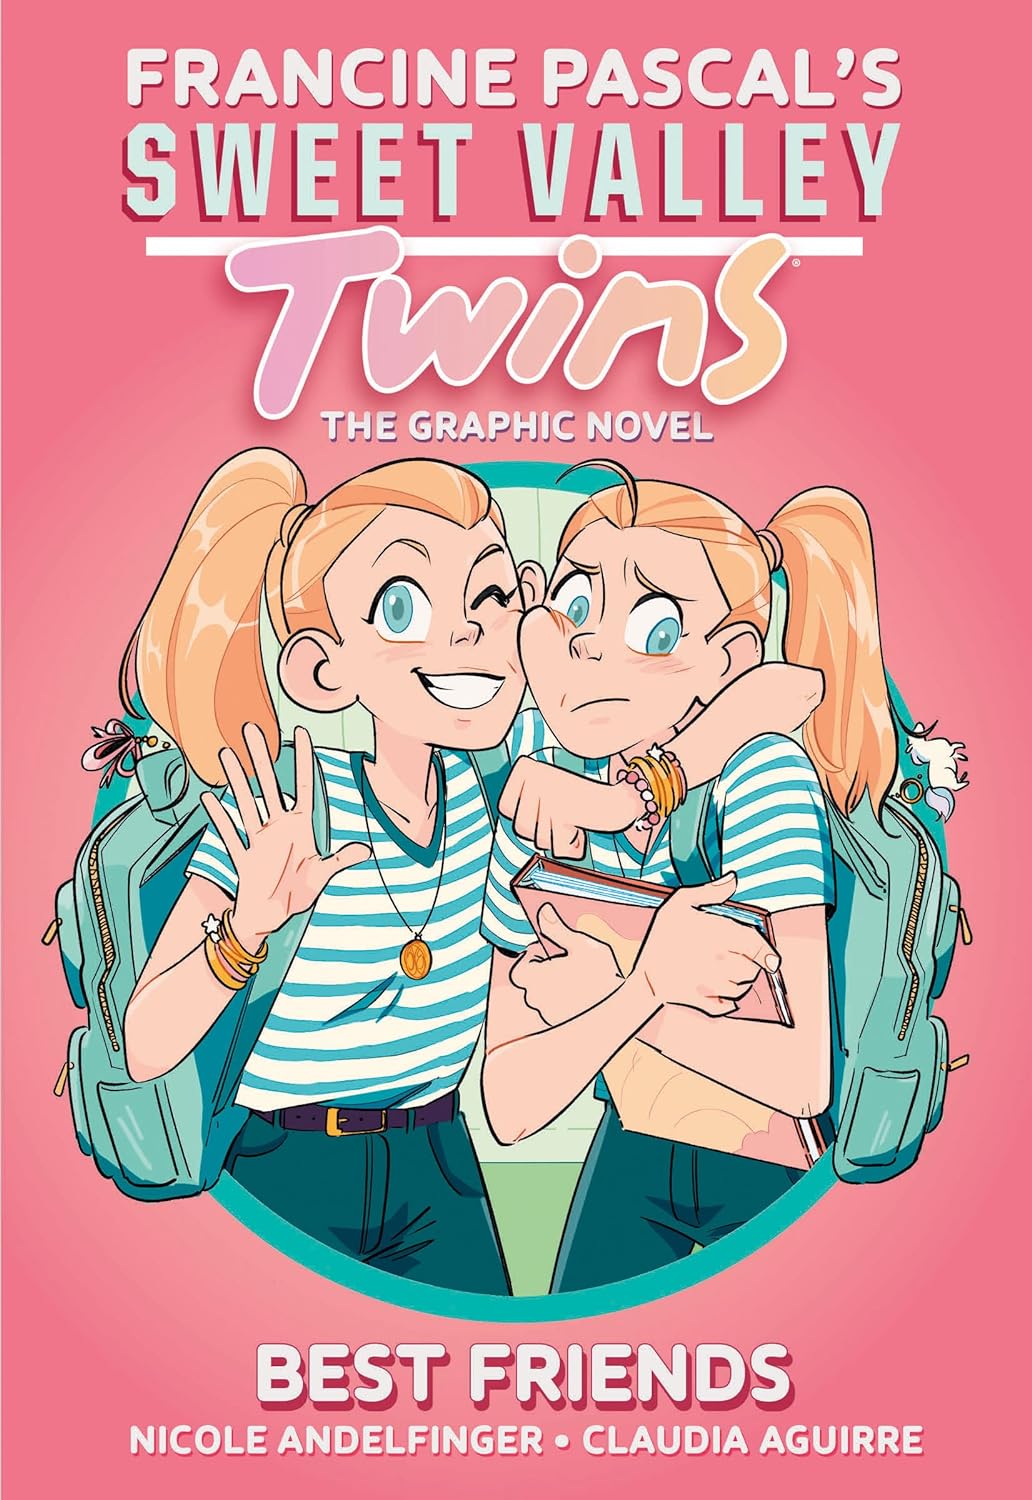 Francine Pascal's Sweet Valley Twins Graphic Novel - Best Friends